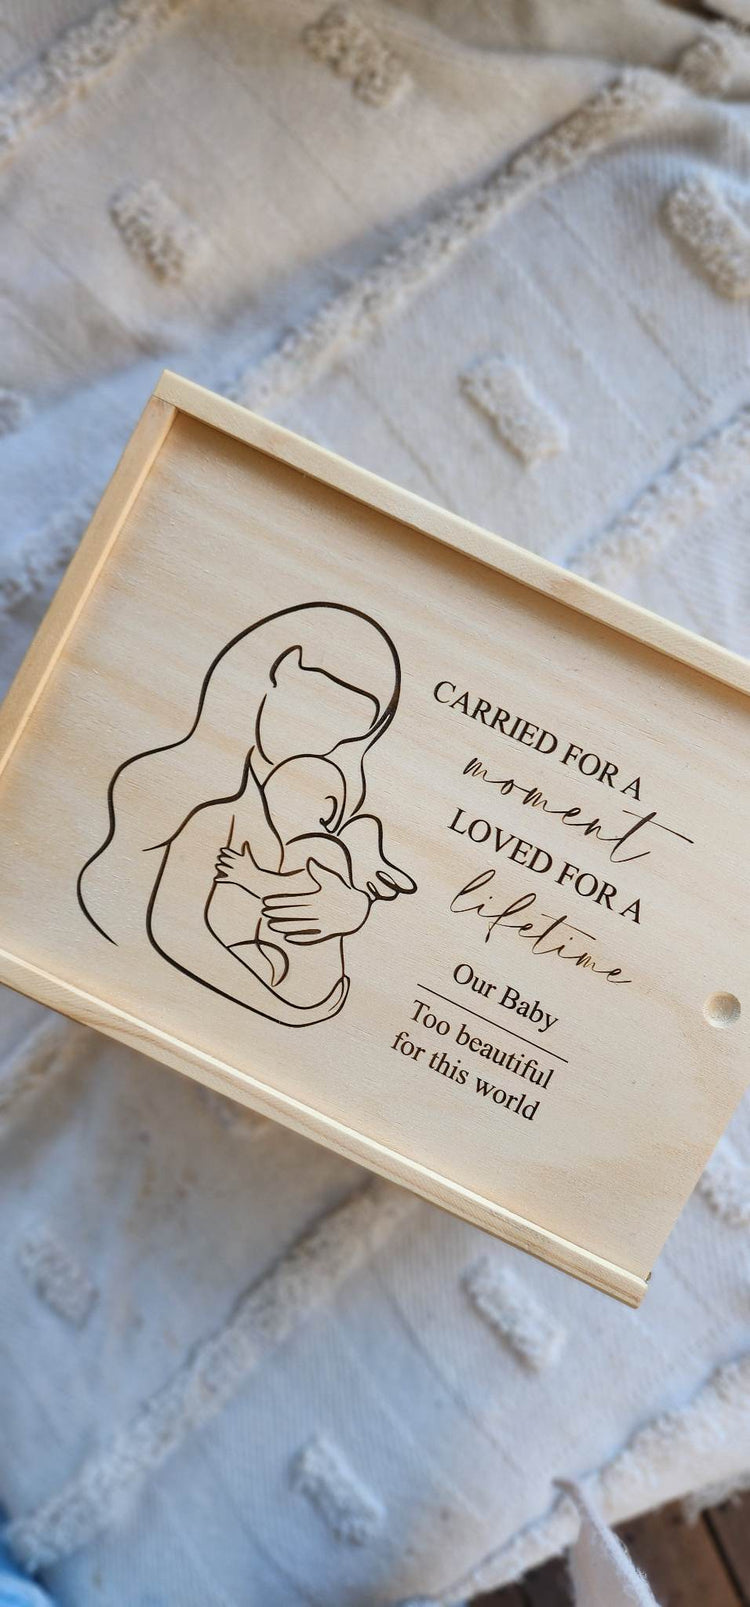 Carried for a moment, loved for a lifetime Keepsake Box - Large